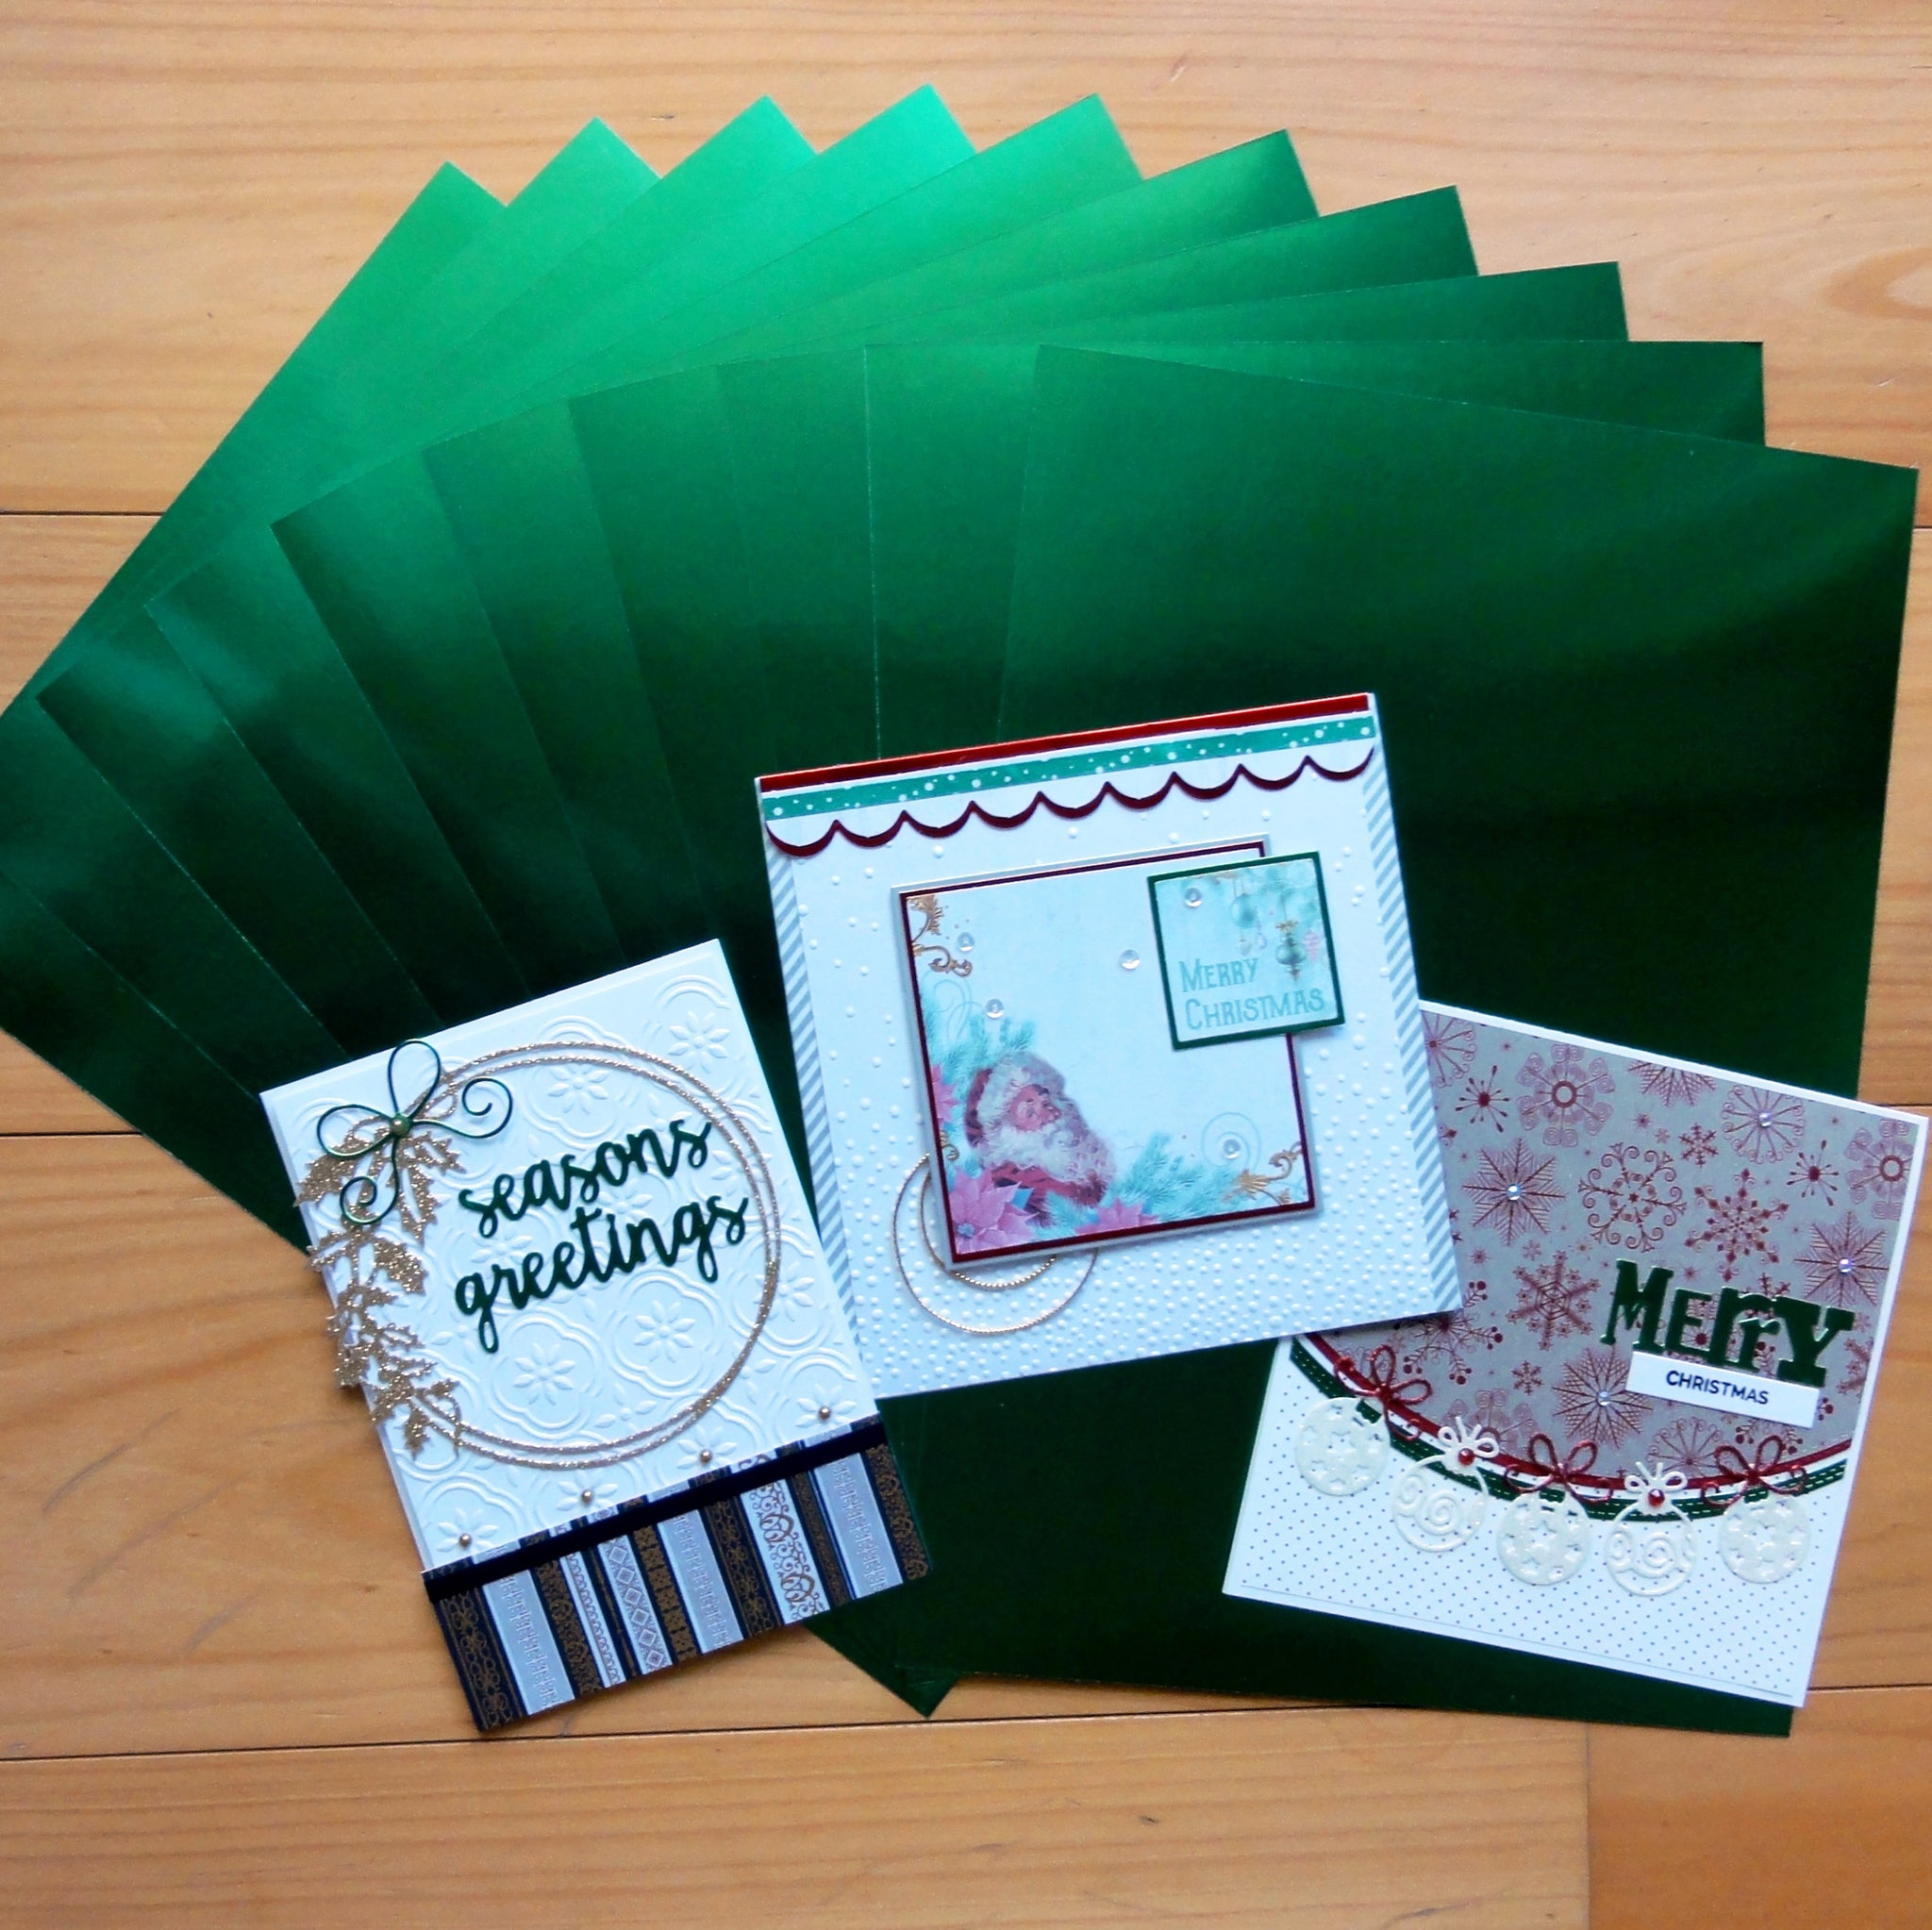 FOIL MIRROR CARD A4 GREEN 275 GSM 10 SHEETS CHRISTMAS BIRTHDAY CELEBRATION CARDMAKING